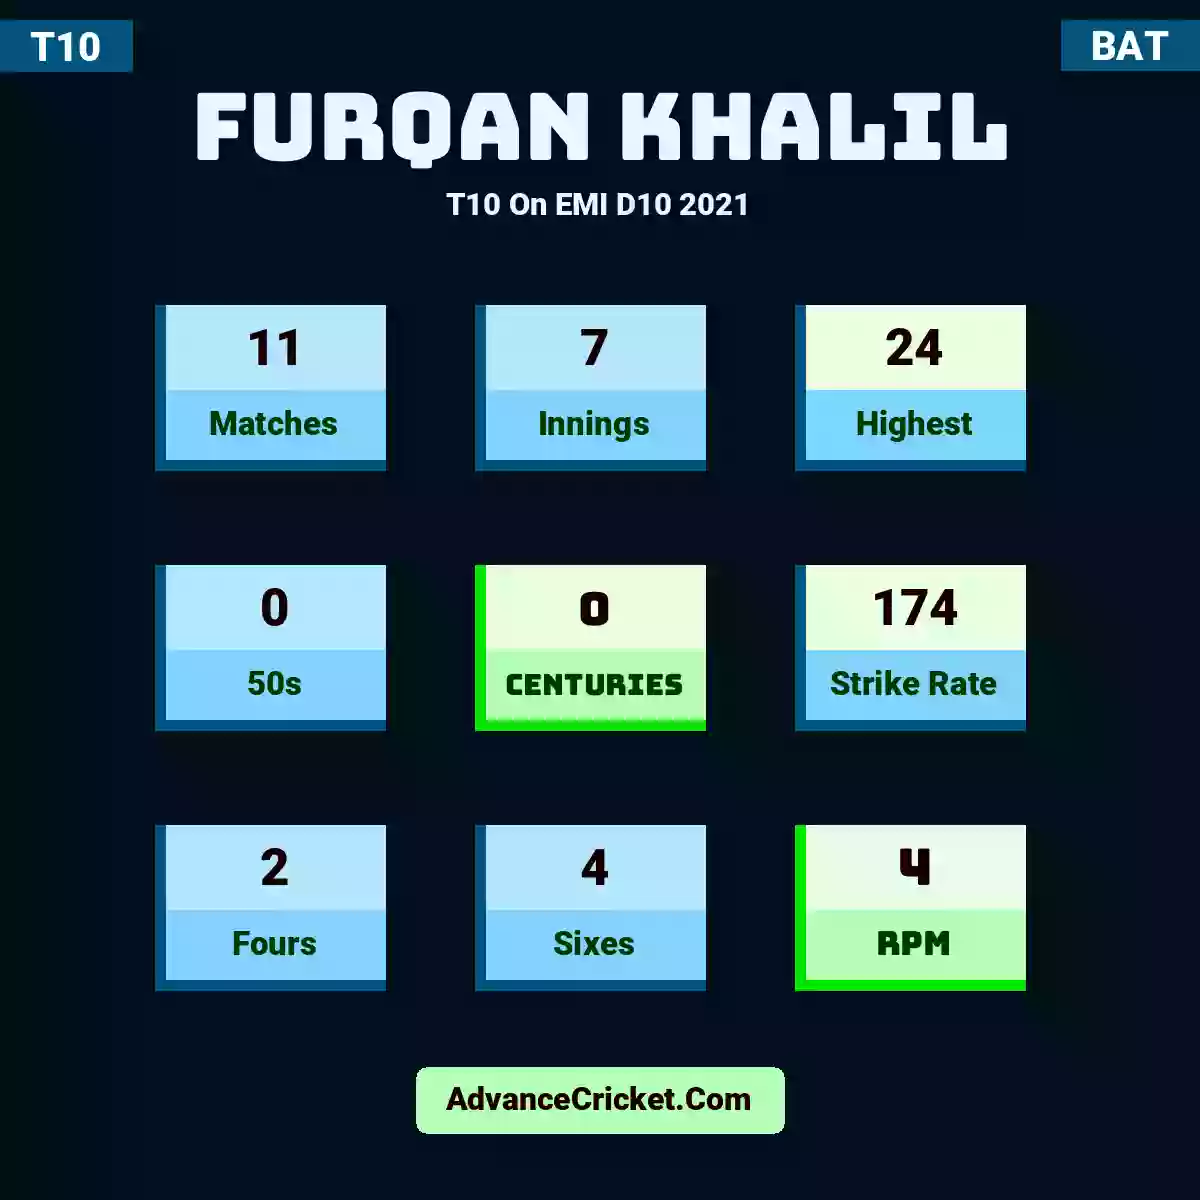 Furqan Khalil T10  On EMI D10 2021, Furqan Khalil played 11 matches, scored 24 runs as highest, 0 half-centuries, and 0 centuries, with a strike rate of 174. F.Khalil hit 2 fours and 4 sixes, with an RPM of 4.